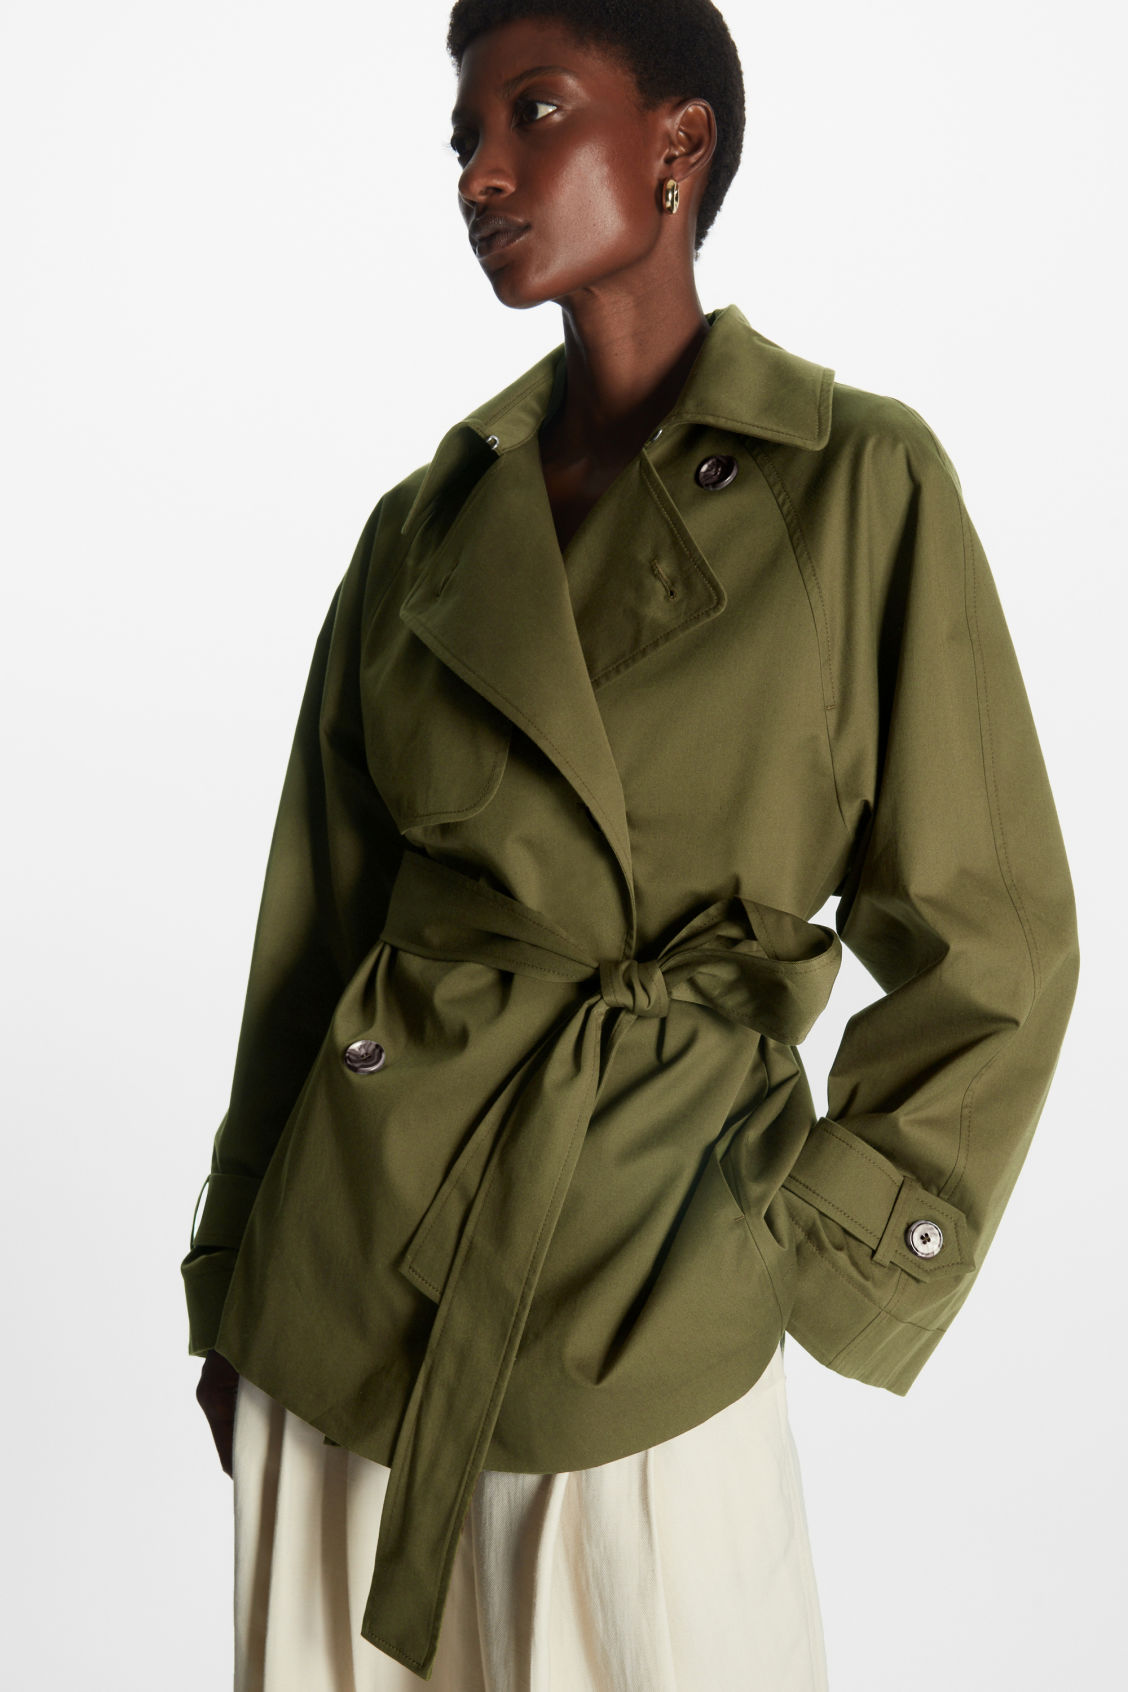 The Most Expensive-Looking Trench on the High Street | Who What Wear UK